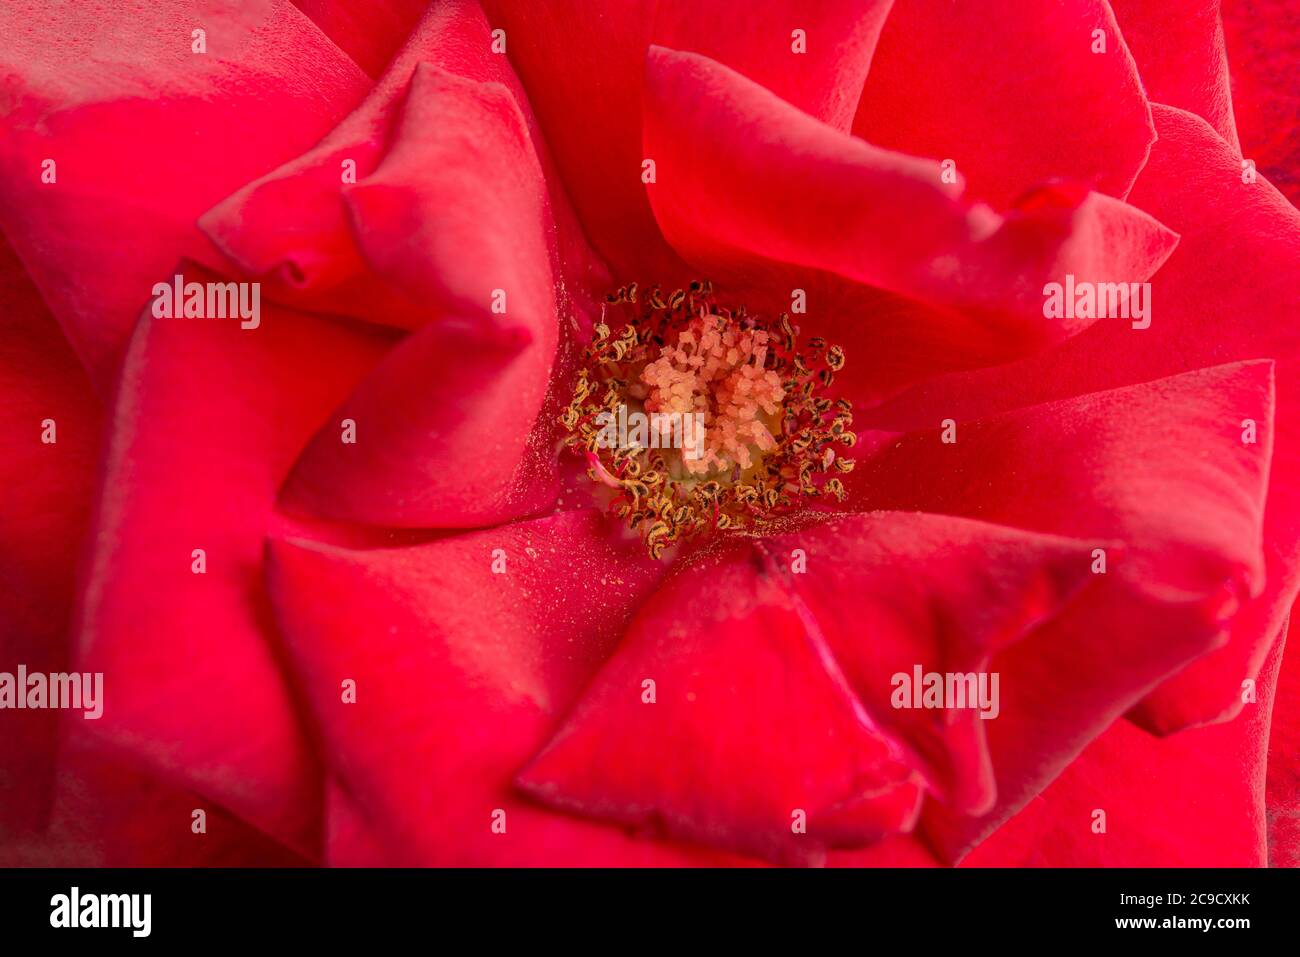 An extreme close-up or macro shot with shallow depth of field and very selective focus of a red rose flower petals in full bloom. Stock Photo